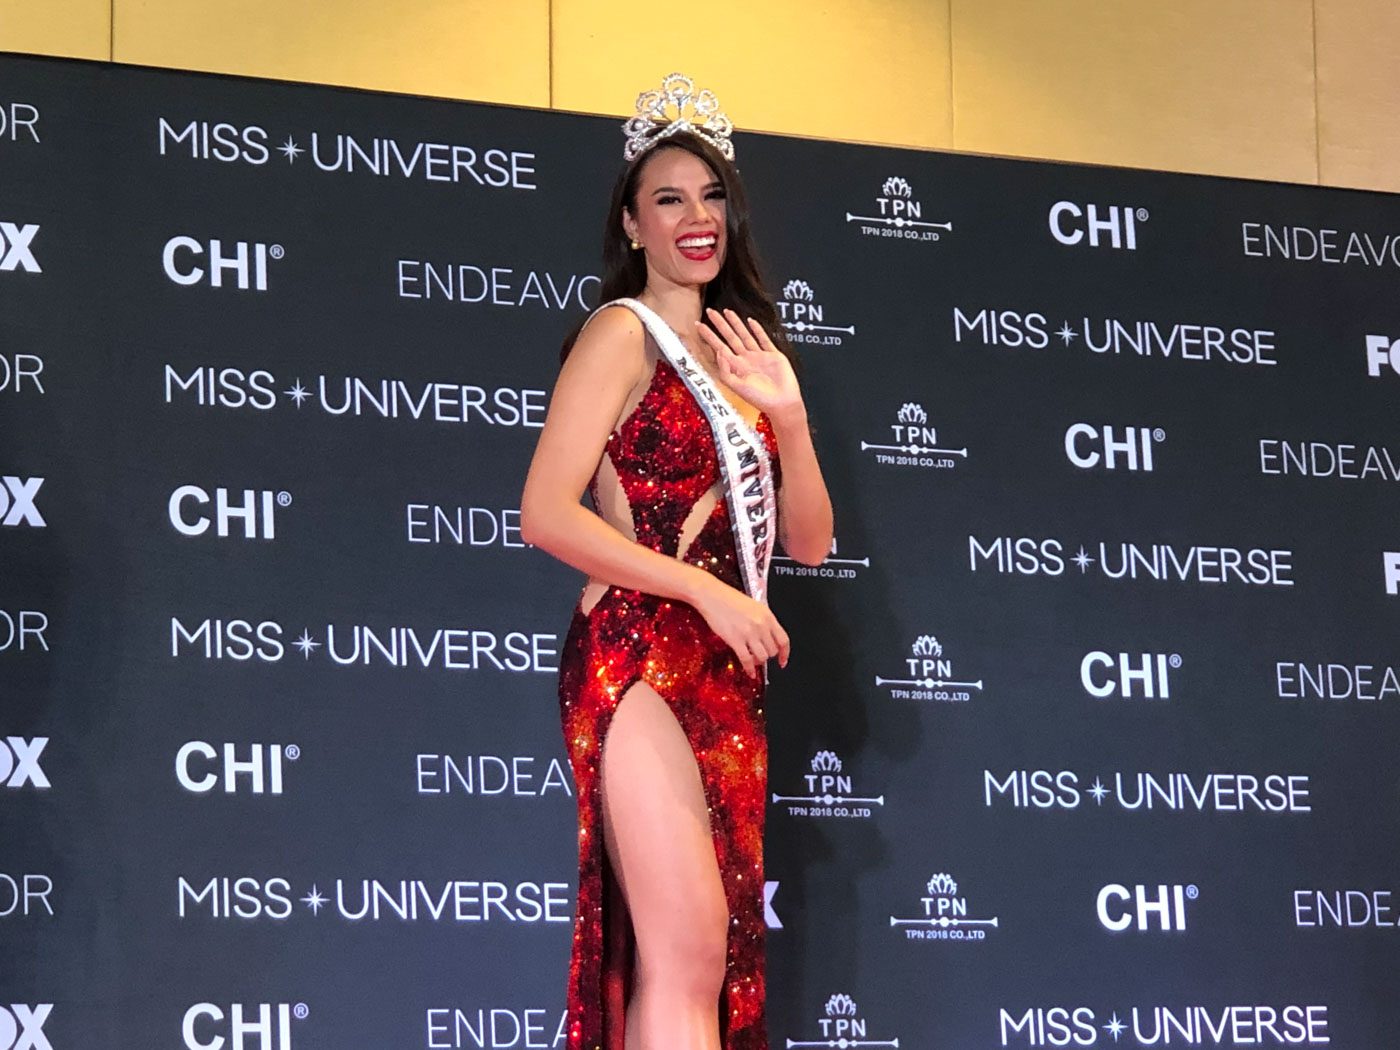 What the stars are saying about Catriona Gray’s Miss Universe 2018 win